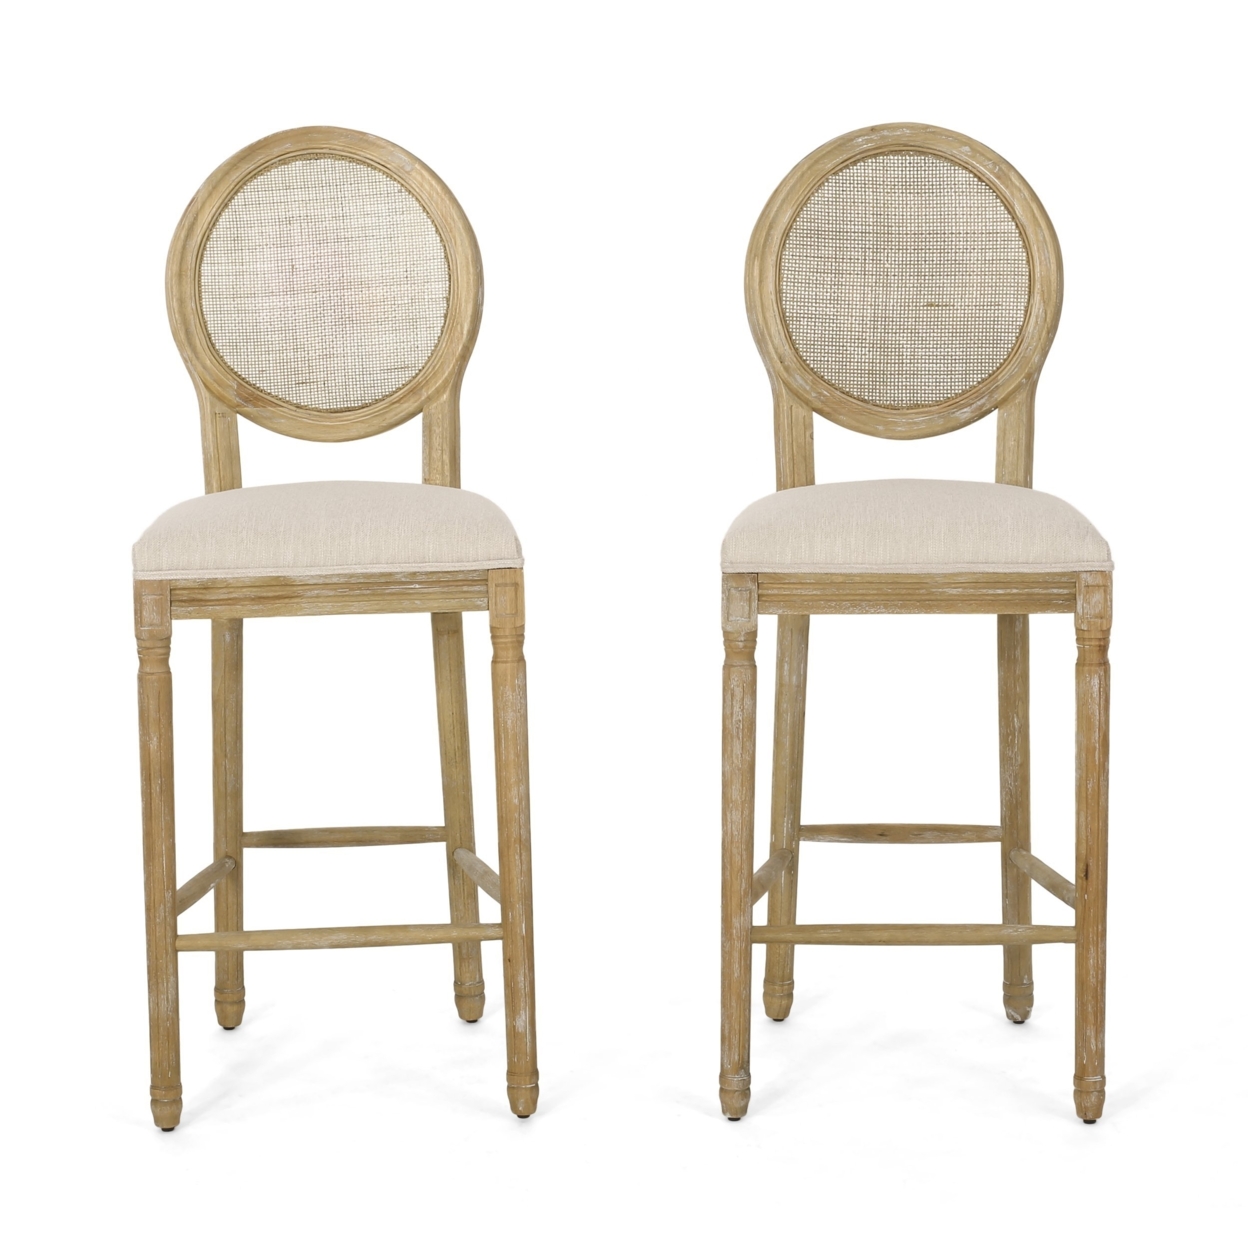 Salton French Country Wooden Barstools With Upholstered Seating (Set Of 2) - Natural/beige